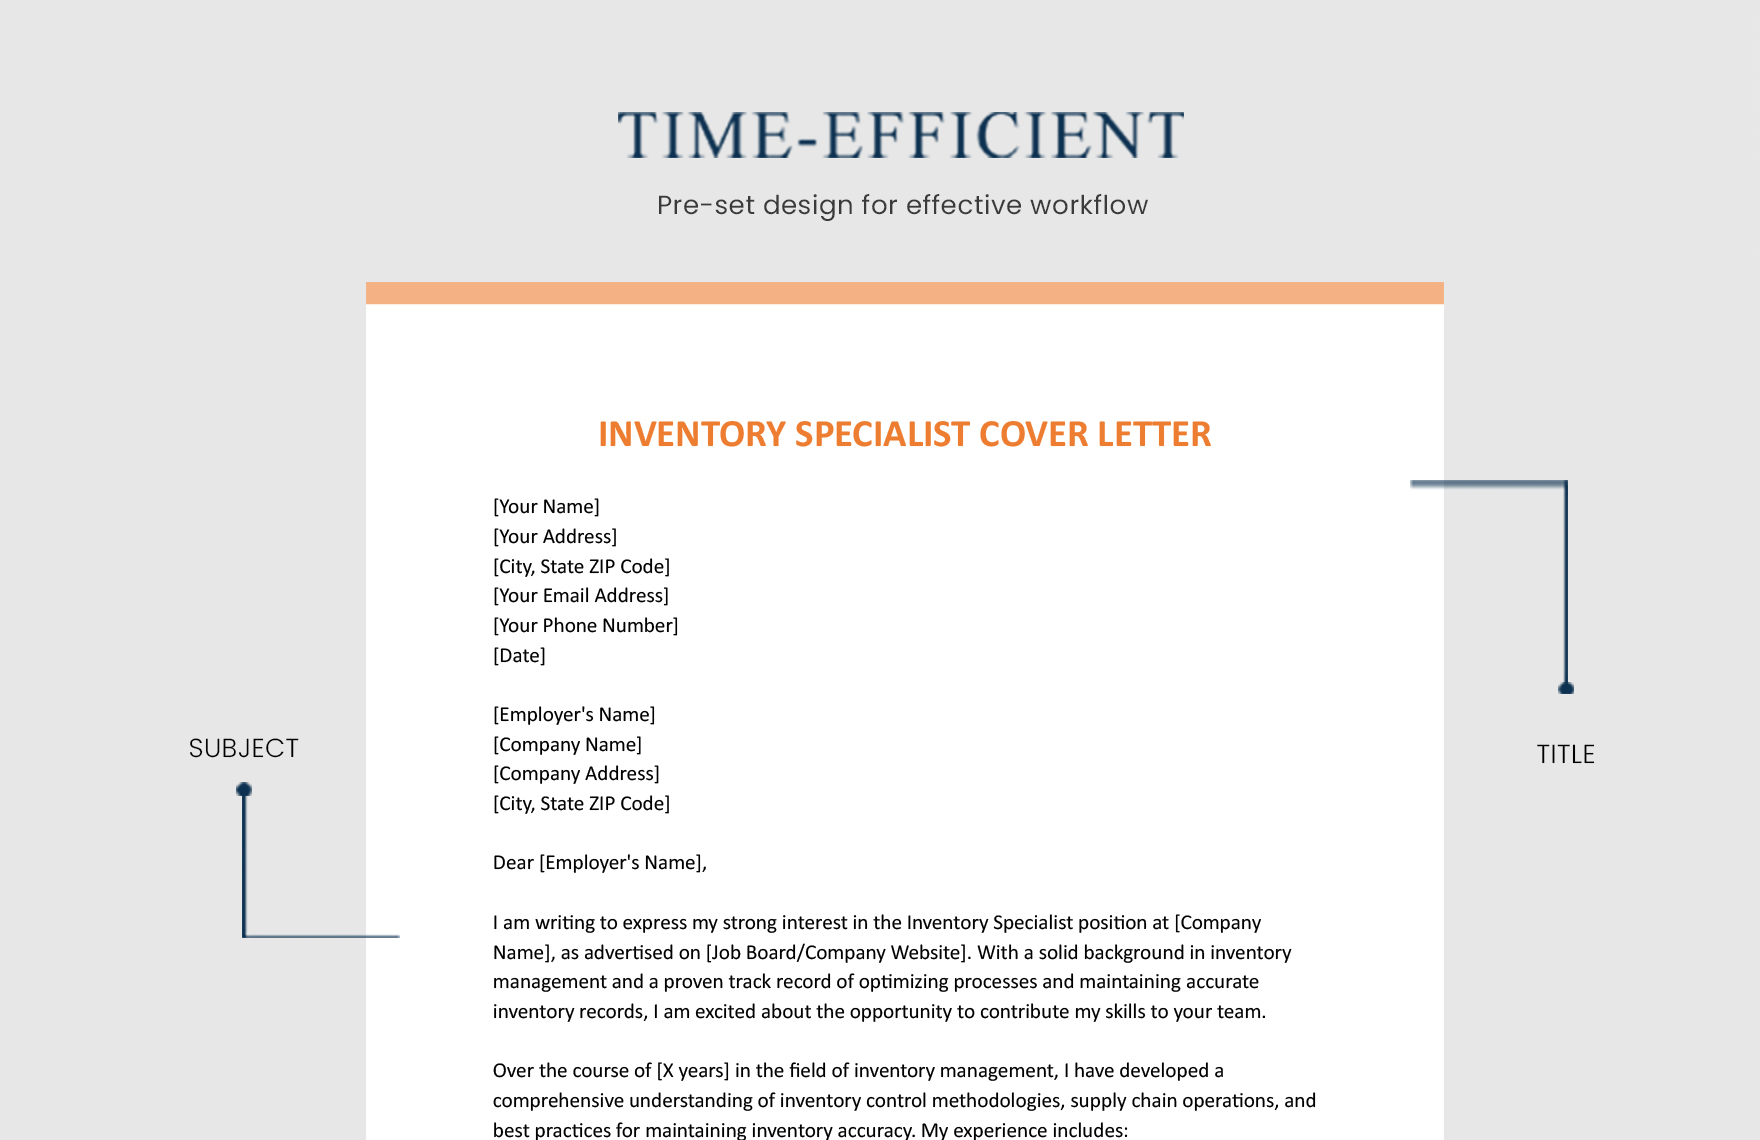 Inventory Specialist Cover Letter